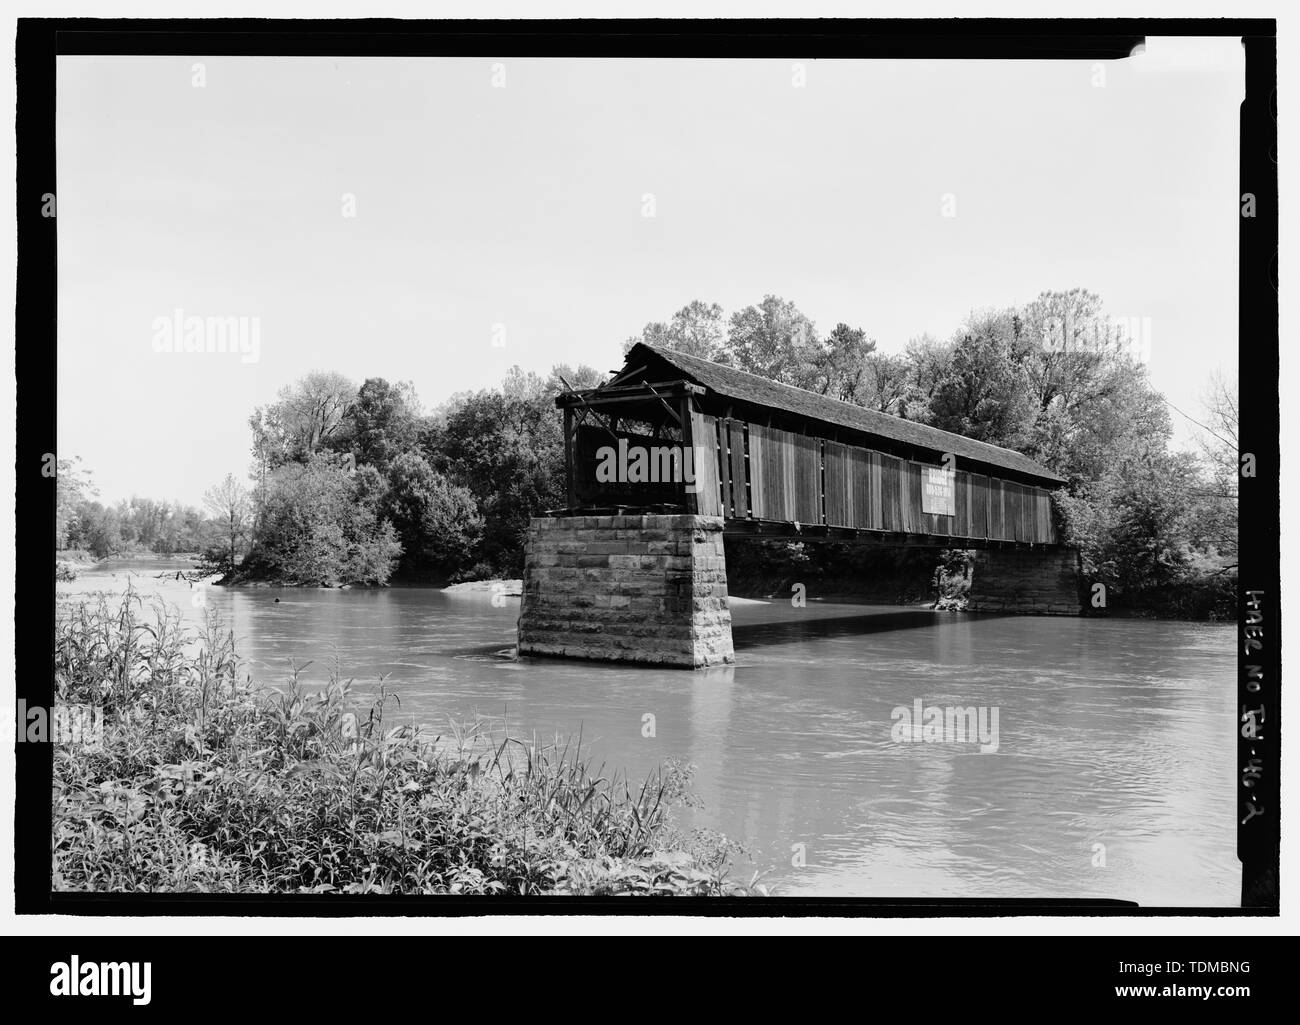 PERSPECTIVE VIEW FROM NORTHWEST. - Bells Ford Bridge, Spanning East Fork White River at State Route 258, Seymour, Jackson County, IN; Pattison, Robert; McNairy, Claflen and Company; Post, Simeon S; Post, Andrew; Hull, W L; Blish, John H; Bell, Isaac; Claflin, Henry; McNairy, Albert; Seymour Citizen's Association; Seymour Bridge Company; J.A. Barker Engineering; Union Pacific Railroad; Cleveland Bridge and Car Works; Atlantic Bridge Works; L.B. Bloomer and Company; Watson Manufacturing Company; Detroit Bridge Works; J.H. Cofrode; Christianson, Justine, transmitter; Marston, Christopher, project Stock Photo